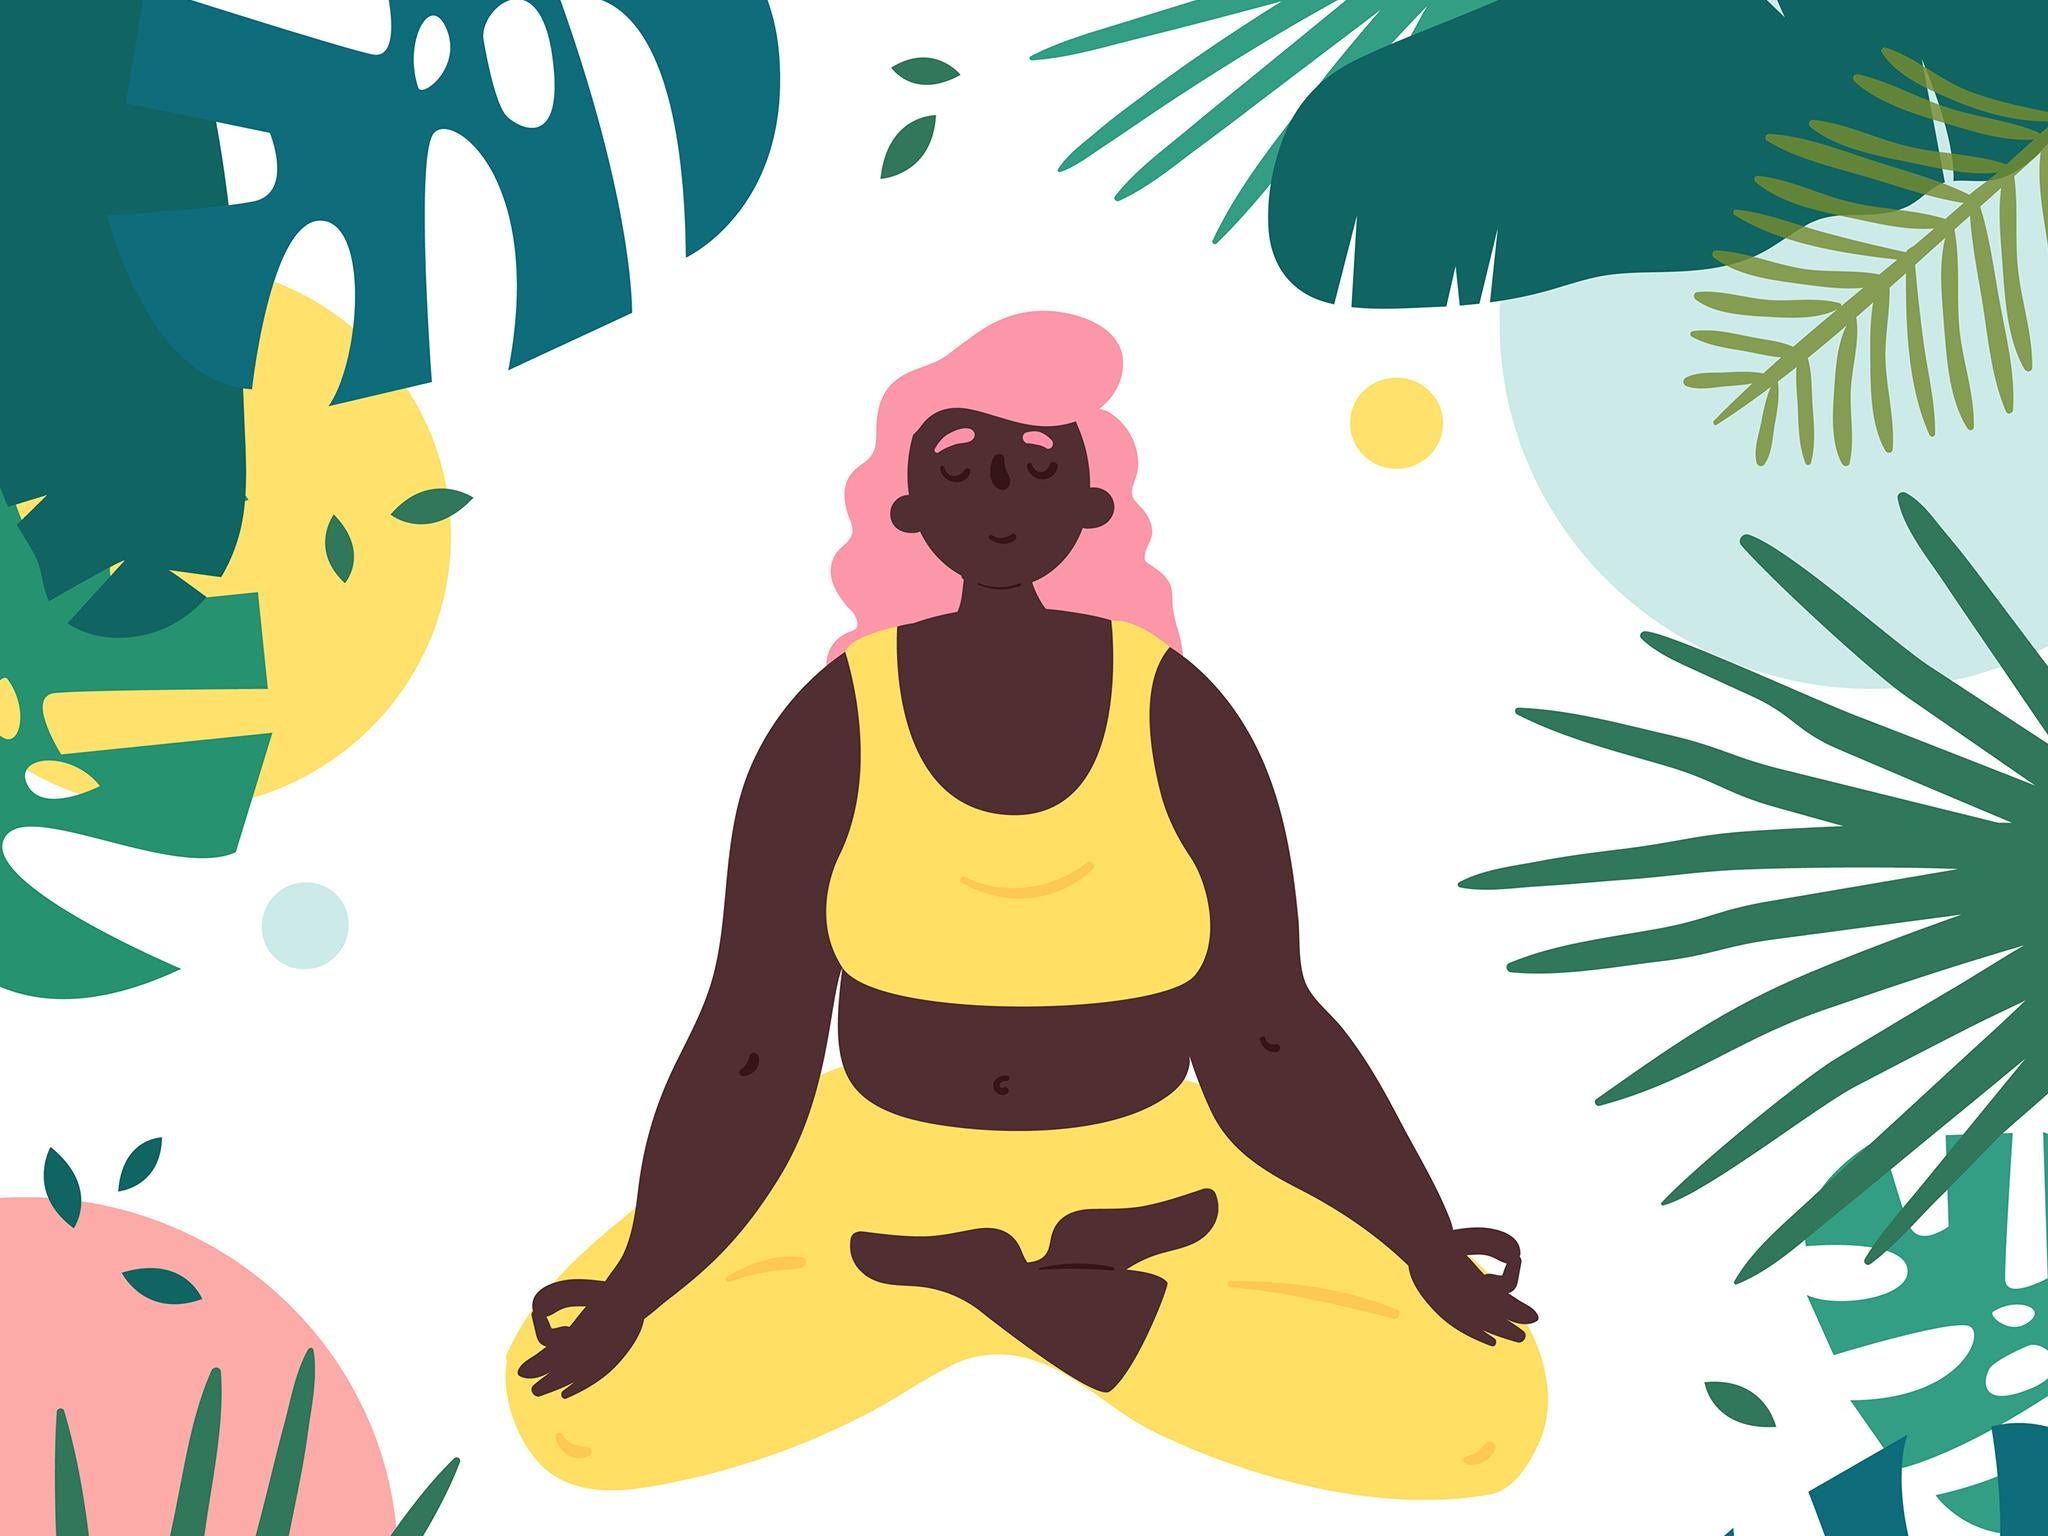 Everything You Need for Yoga at Home in 2020